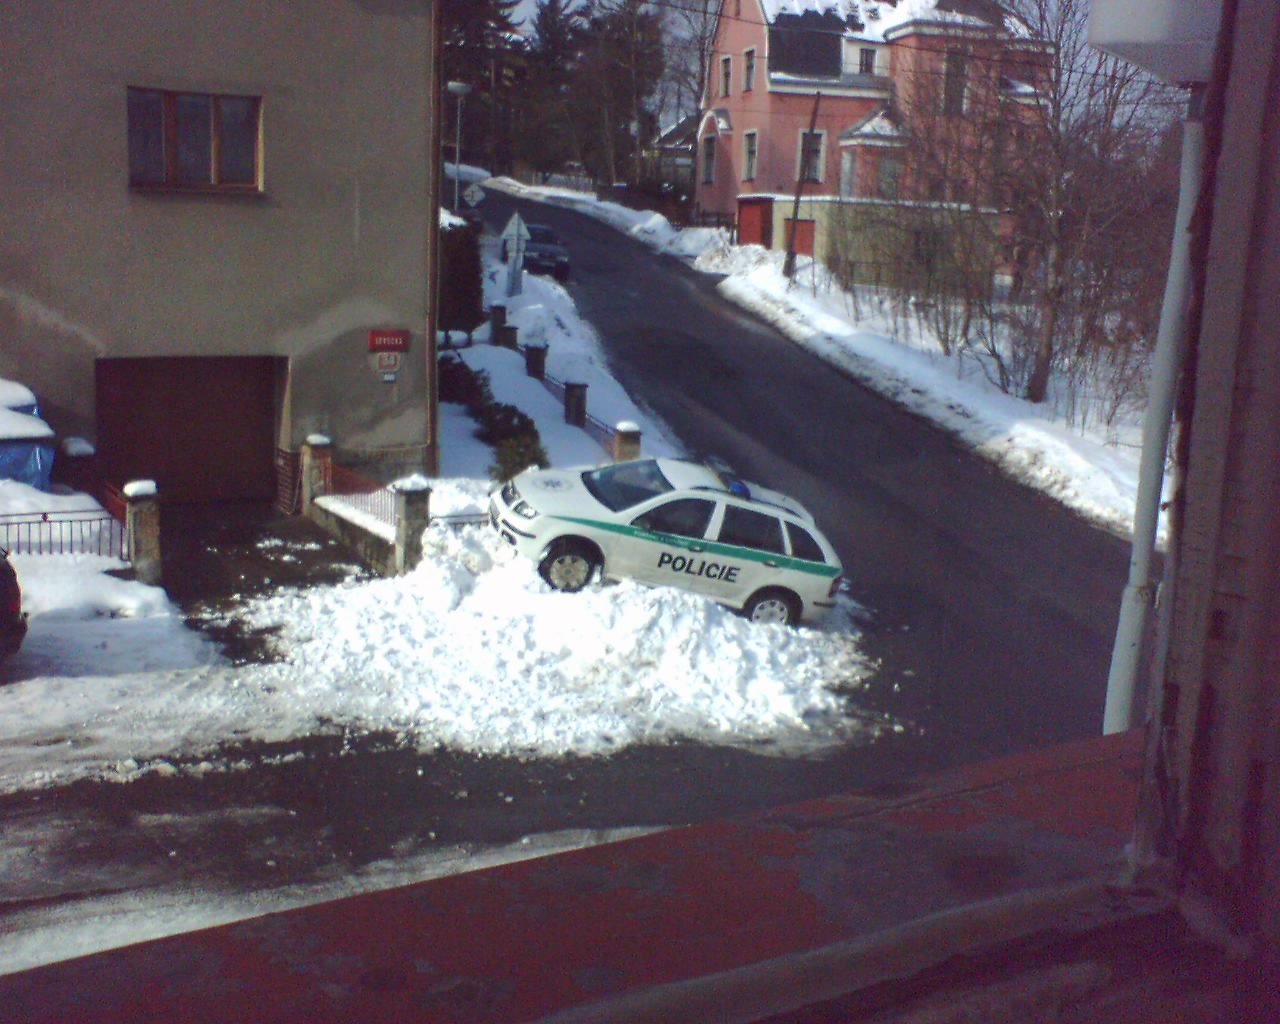 Perfect parking spot for czech police